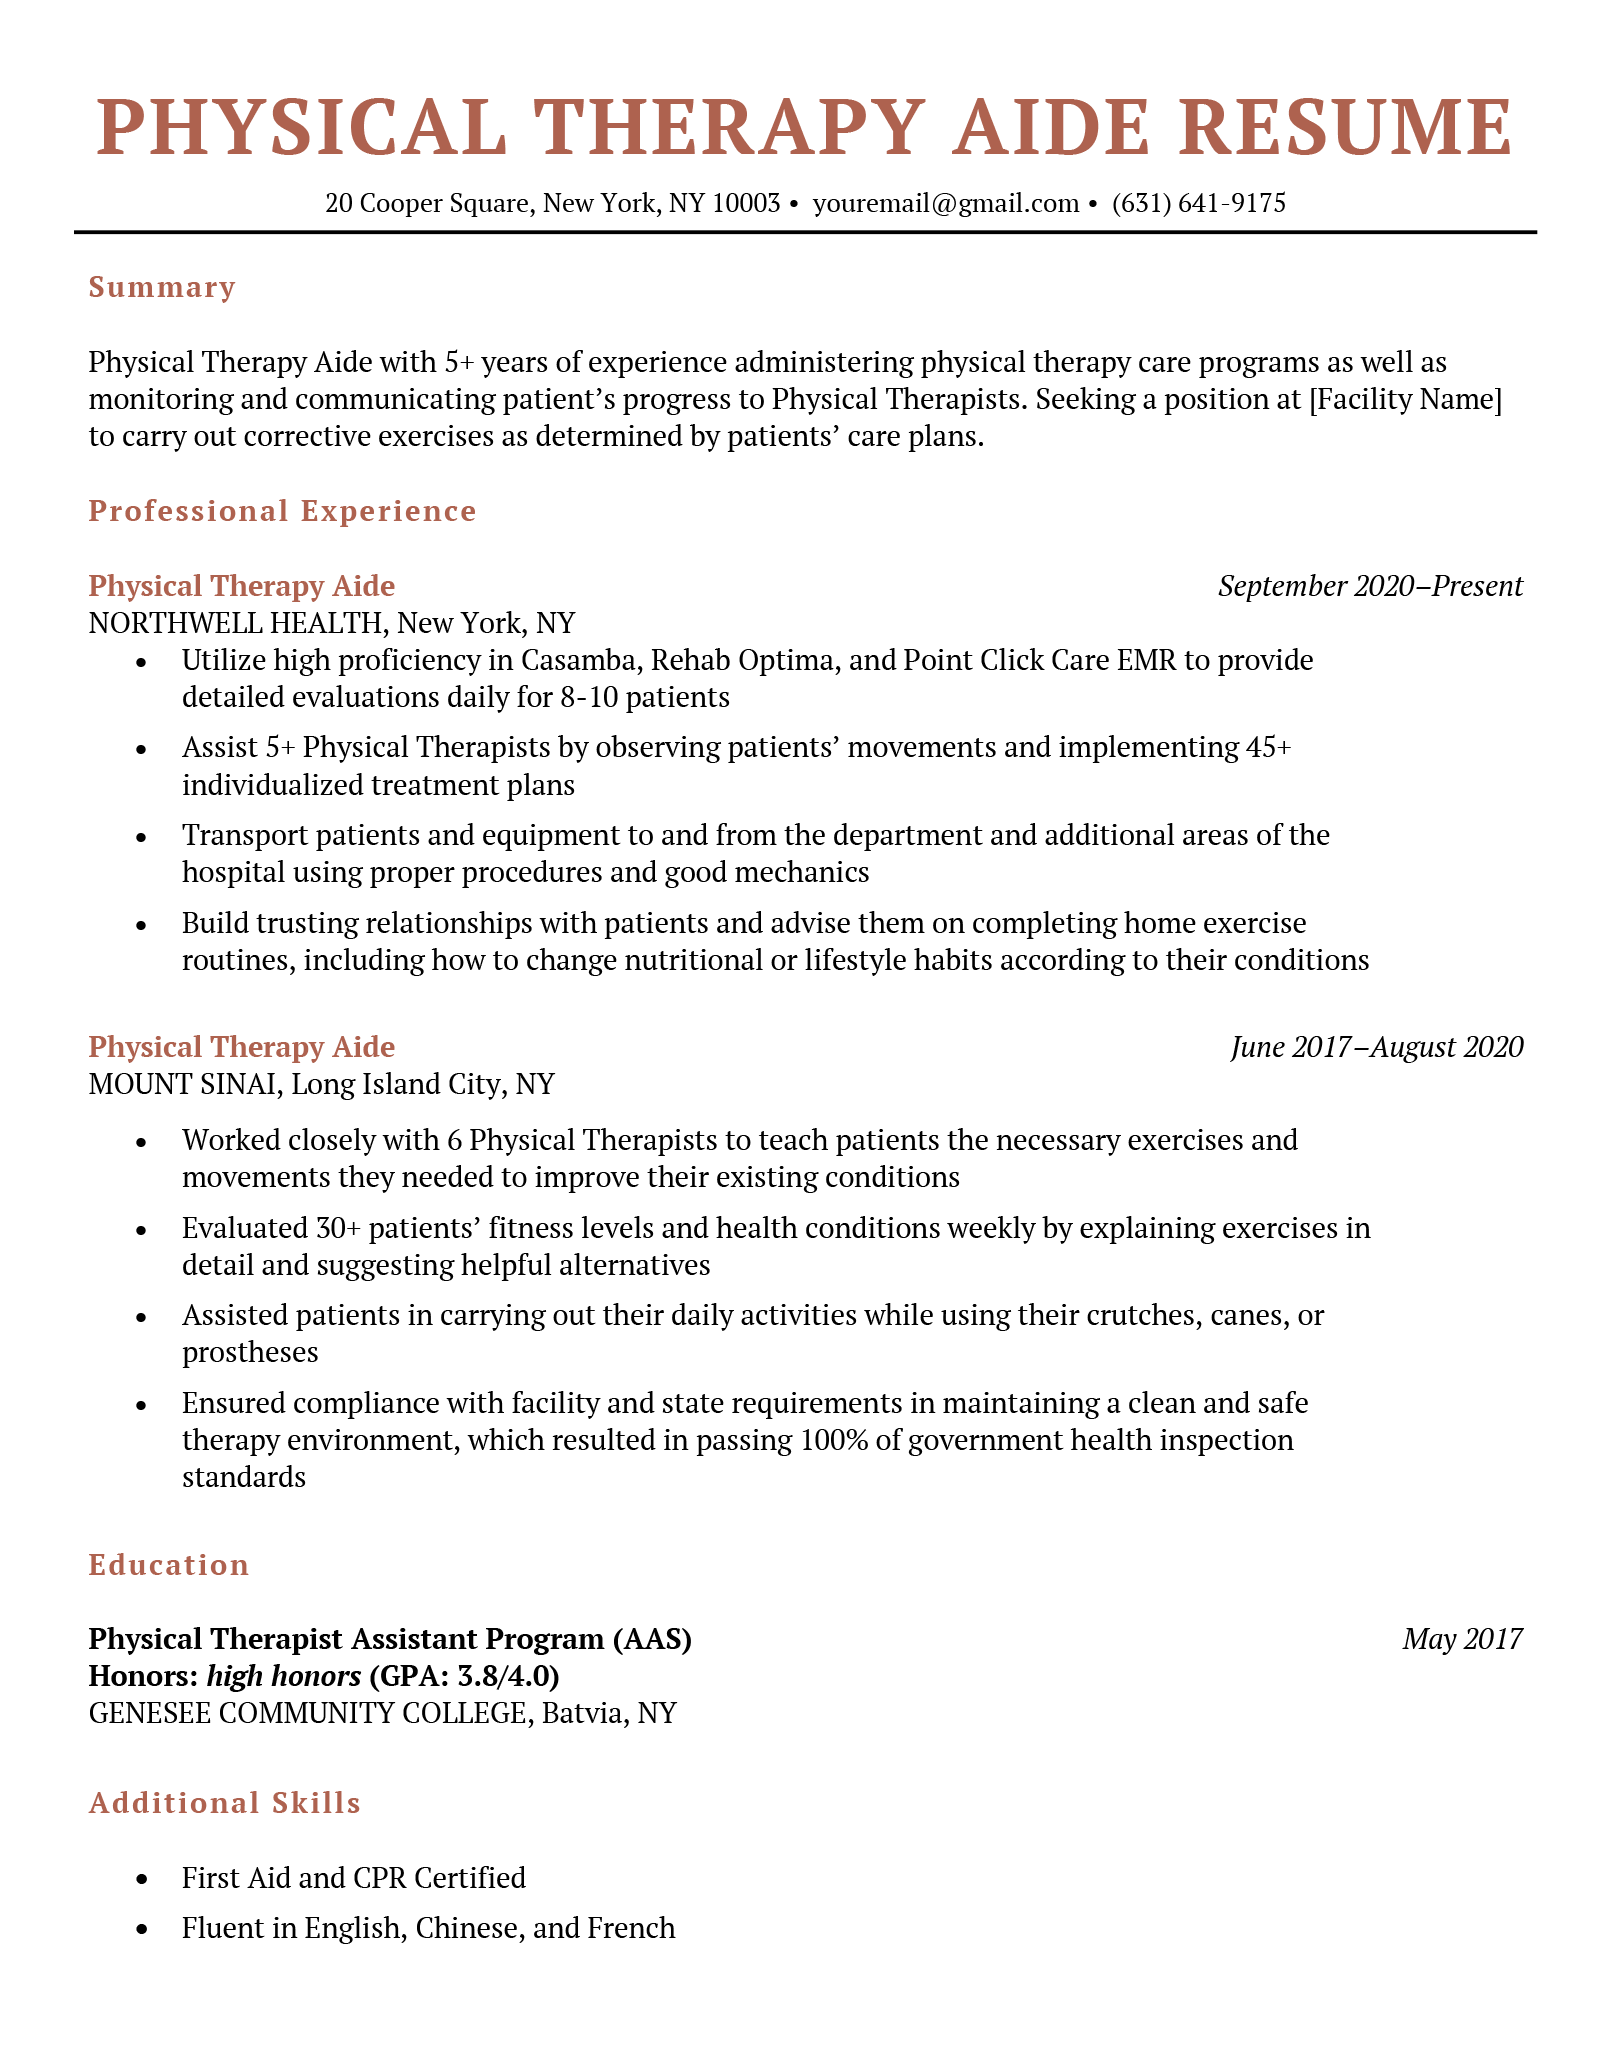 An example of a physical therapy aide resume with a centered resume header and coral colored font to differentiate between each section header and job title